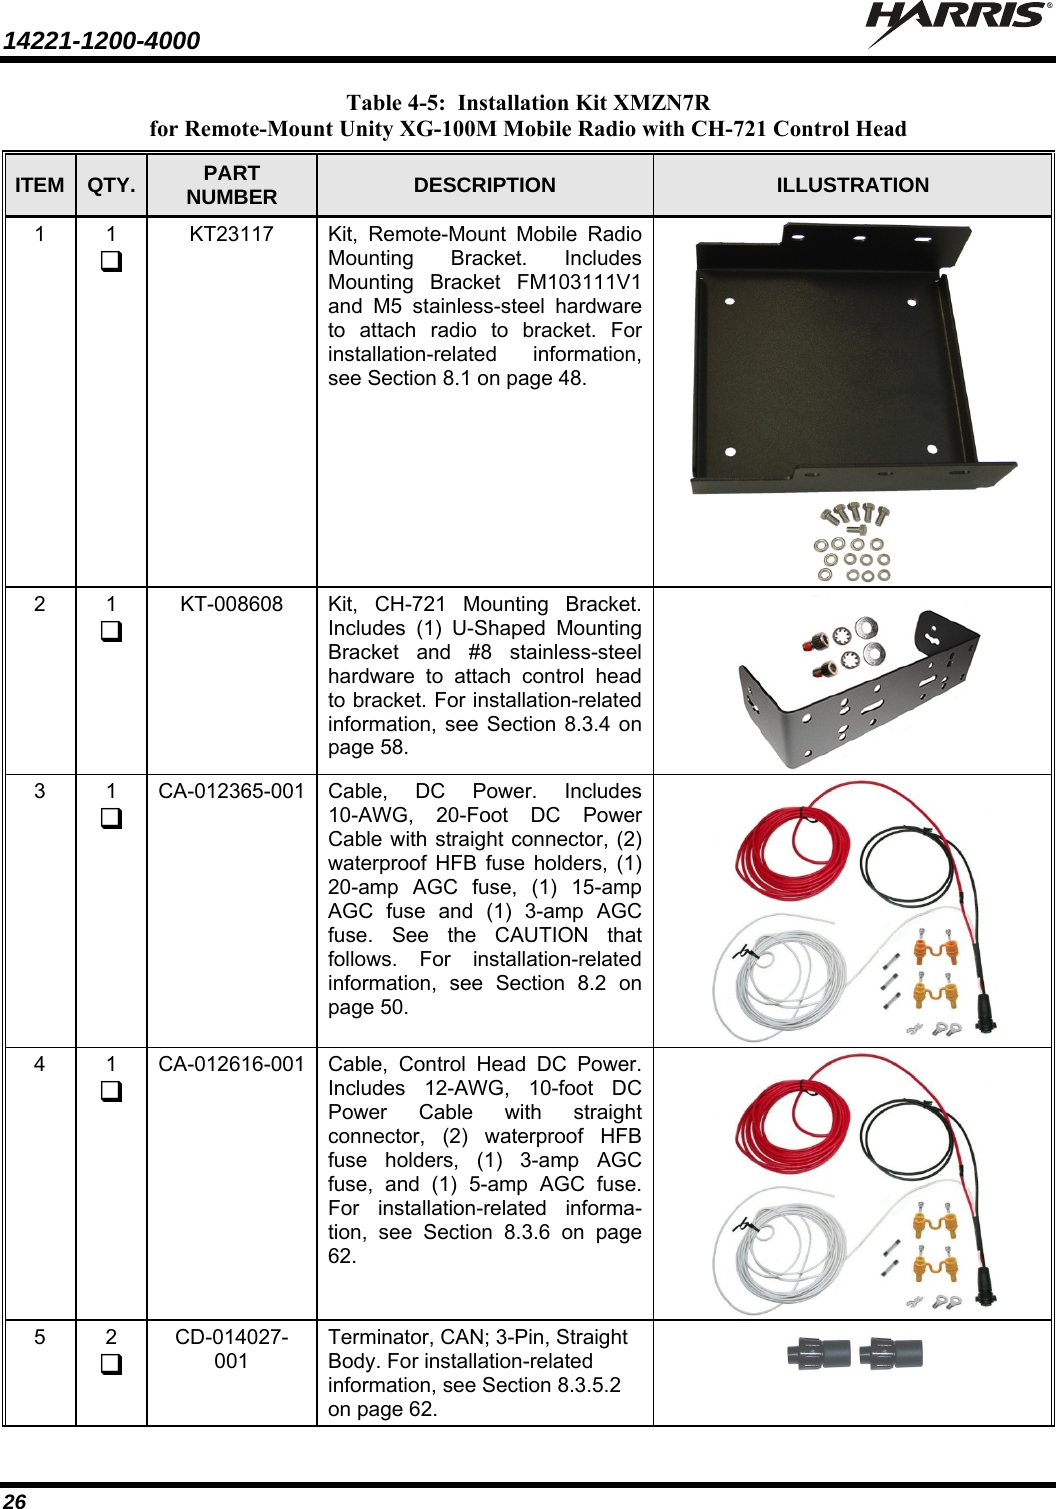 14221-1200-4000    26 Table 4-5:  Installation Kit XMZN7R for Remote-Mount Unity XG-100M Mobile Radio with CH-721 Control Head ITEM  QTY.  PART NUMBER  DESCRIPTION  ILLUSTRATION 1  1  KT23117  Kit, Remote-Mount Mobile Radio Mounting Bracket. Includes Mounting Bracket FM103111V1 and M5 stainless-steel hardware to attach radio to bracket. For installation-related information, see Section 8.1 on page 48. 2  1  KT-008608  Kit, CH-721 Mounting Bracket. Includes (1) U-Shaped Mounting Bracket and #8 stainless-steel hardware to attach control head to bracket. For installation-related information, see Section 8.3.4 on page 58. 3  1  CA-012365-001  Cable, DC Power. Includes 10-AWG, 20-Foot DC Power Cable with straight connector, (2) waterproof HFB fuse holders, (1) 20-amp AGC fuse, (1) 15-amp AGC fuse and (1) 3-amp AGC fuse. See the CAUTION that follows. For installation-related information, see Section 8.2 on page 50. 4  1  CA-012616-001  Cable, Control Head DC Power. Includes 12-AWG, 10-foot DC Power Cable with straight connector, (2) waterproof HFB fuse holders, (1) 3-amp AGC fuse, and (1) 5-amp AGC fuse. For installation-related informa-tion, see Section 8.3.6 on page 62. 5  2  CD-014027-001 Terminator, CAN; 3-Pin, Straight Body. For installation-related information, see Section 8.3.5.2 on page 62.  